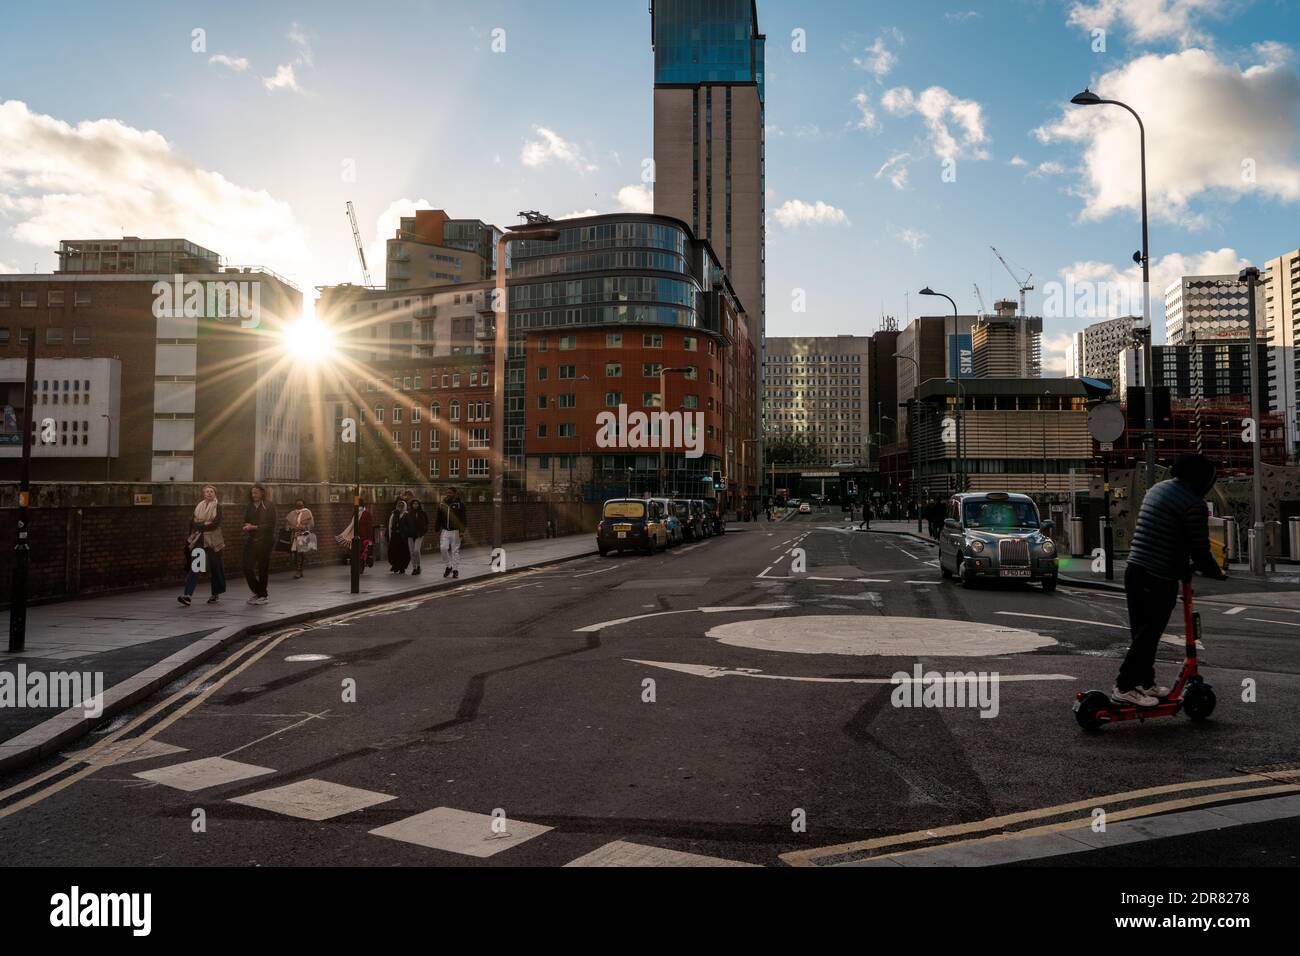 Birmingham cityscape with setting sun over buildings, pedestrians walking and man on electric scooter Stock Photo